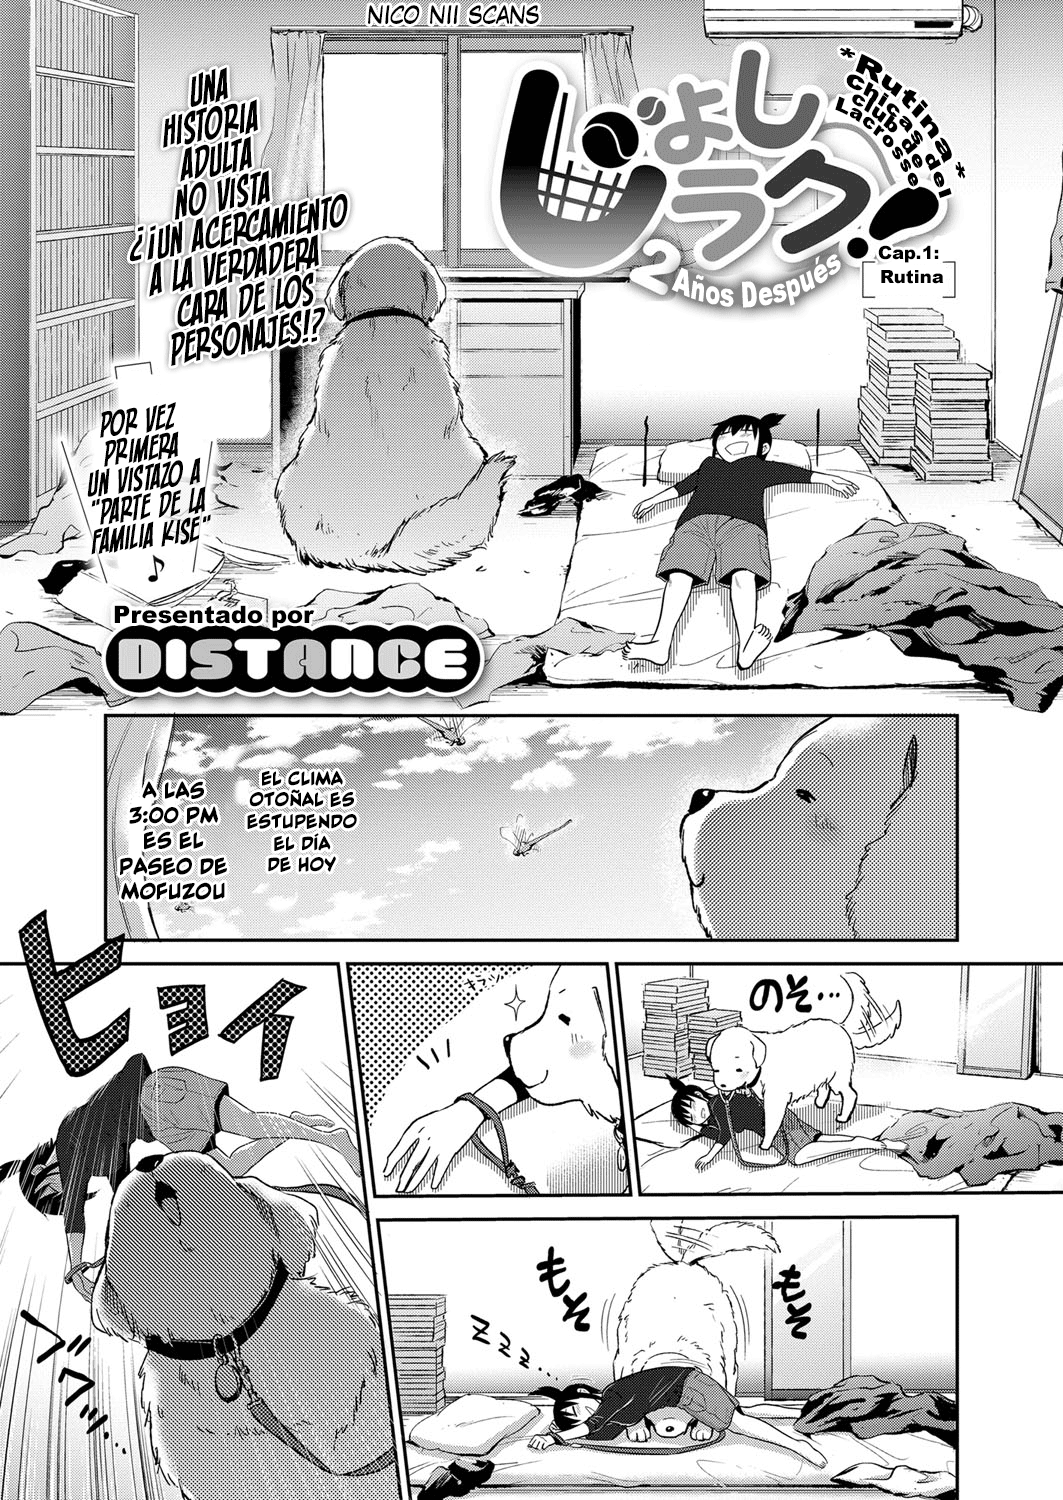 [DISTANCE] Joshi Luck! ~2 Years Later~ Nichijou Hen Ch. 1 (COMIC ExE 11) [Spanish] [NicoNiiScans] [Digital] [DISTANCE] じょしラク! ～2 Years Later～ 日常編 第1話 (コミック エグゼ 11) [スペイン翻訳] [DL版]